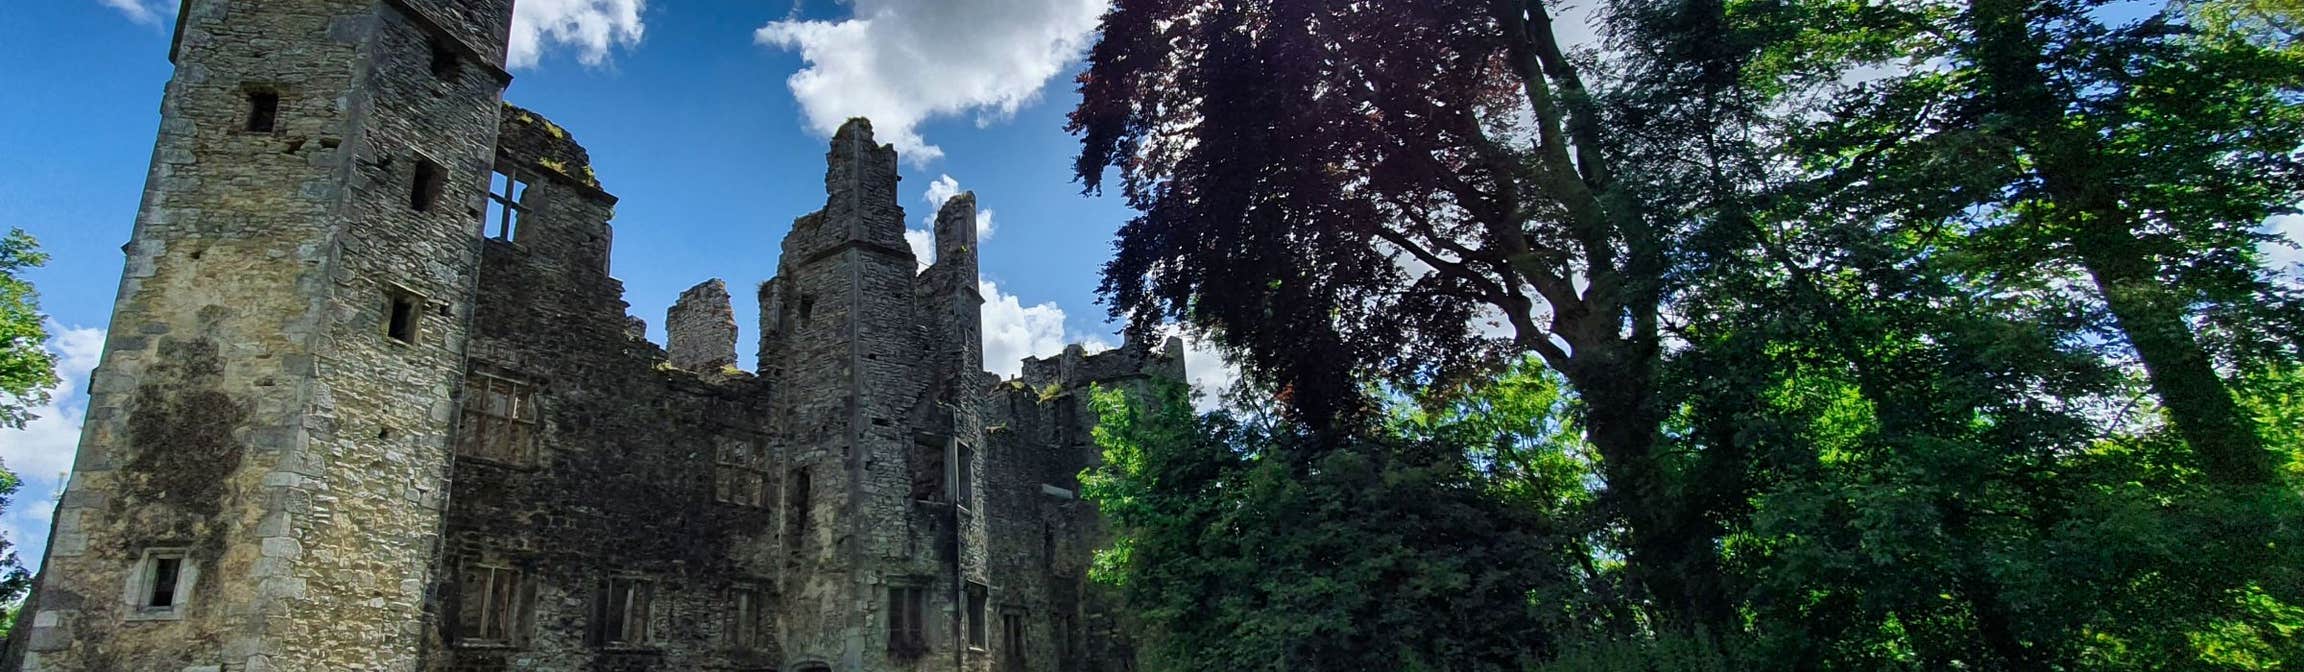 Image of castle ruins in Mallow in County Cork